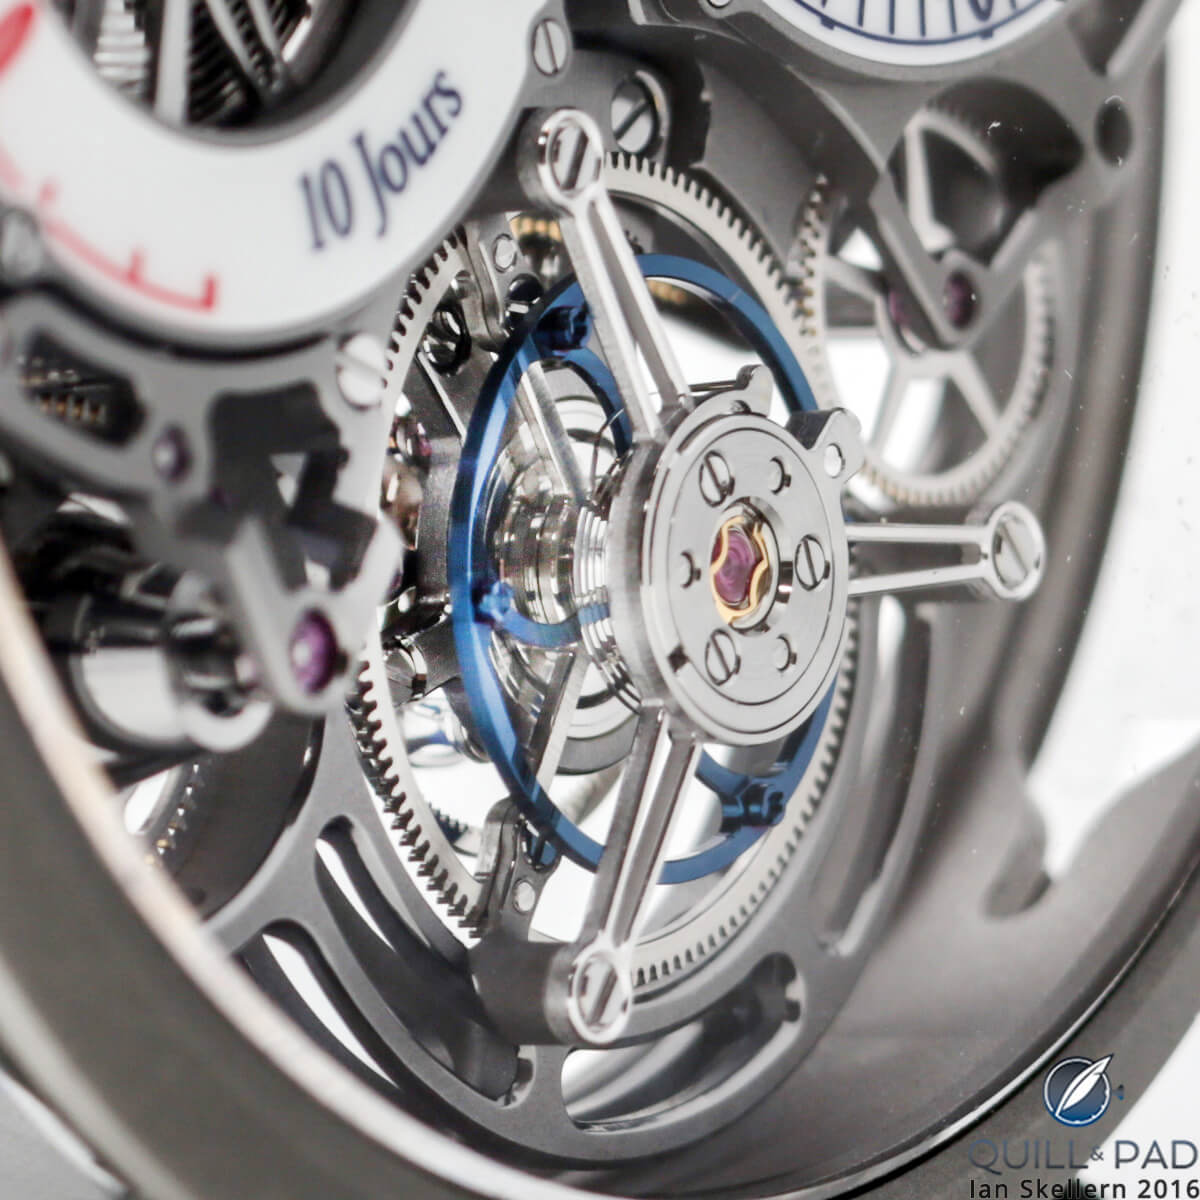 Closer look at the patented flying tourbillon of the Bovet Ottantasei by Pininfarina